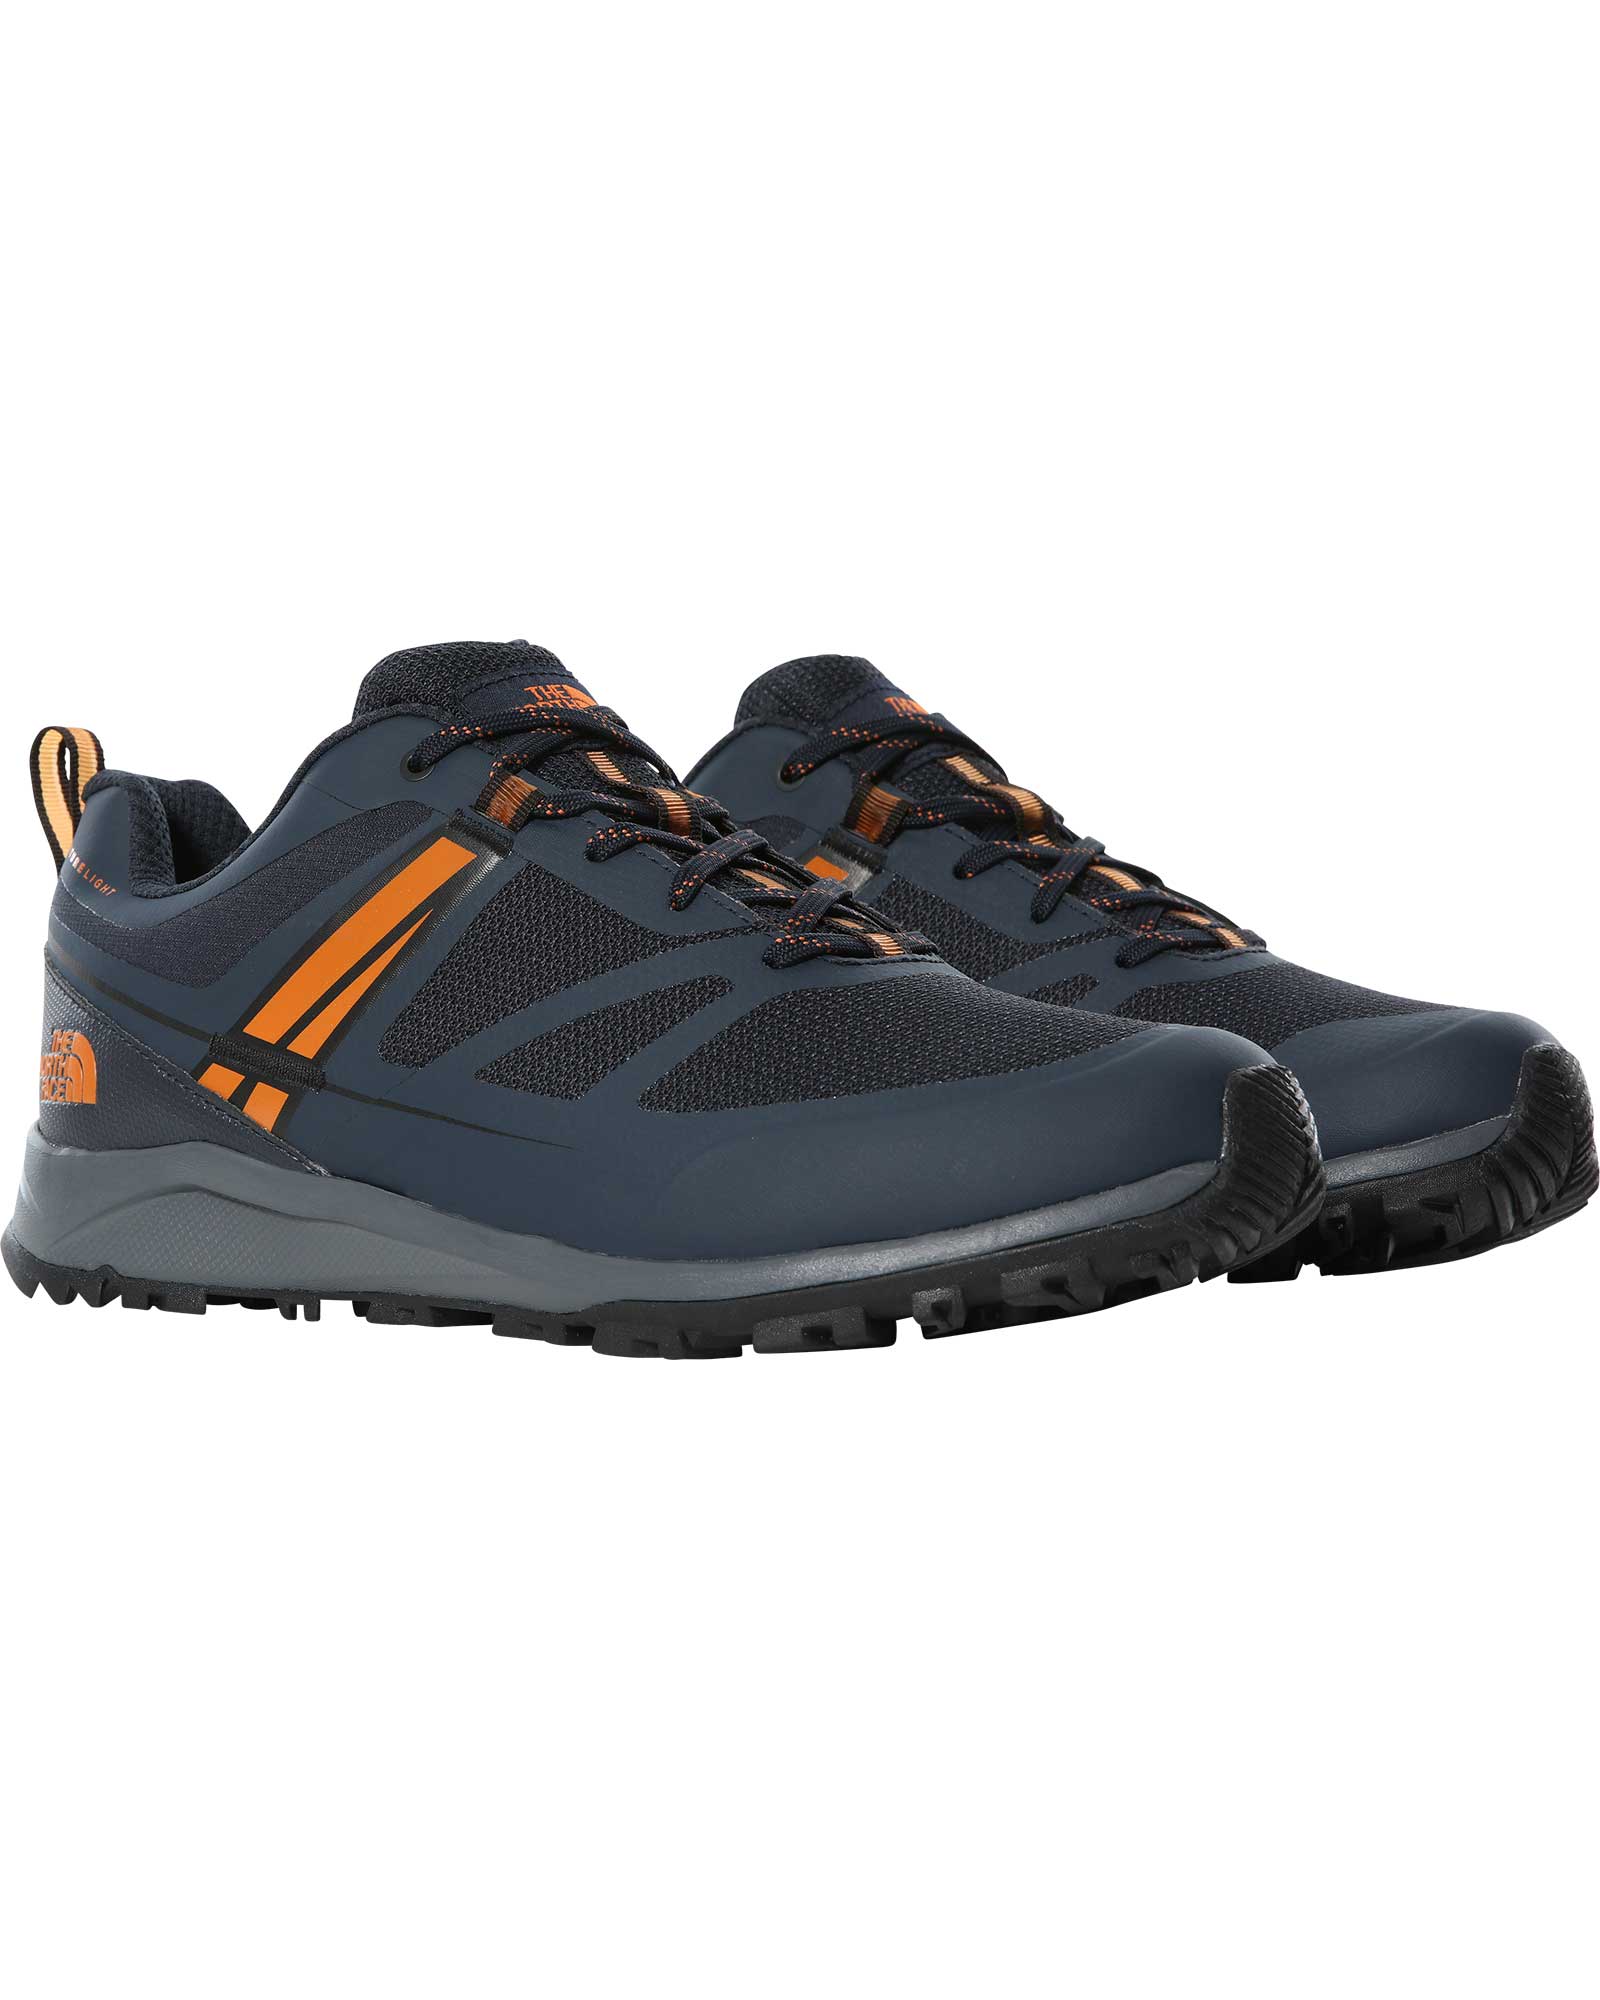 Product image of The North Face Litewave FUTUReLIGHT Men's Shoes